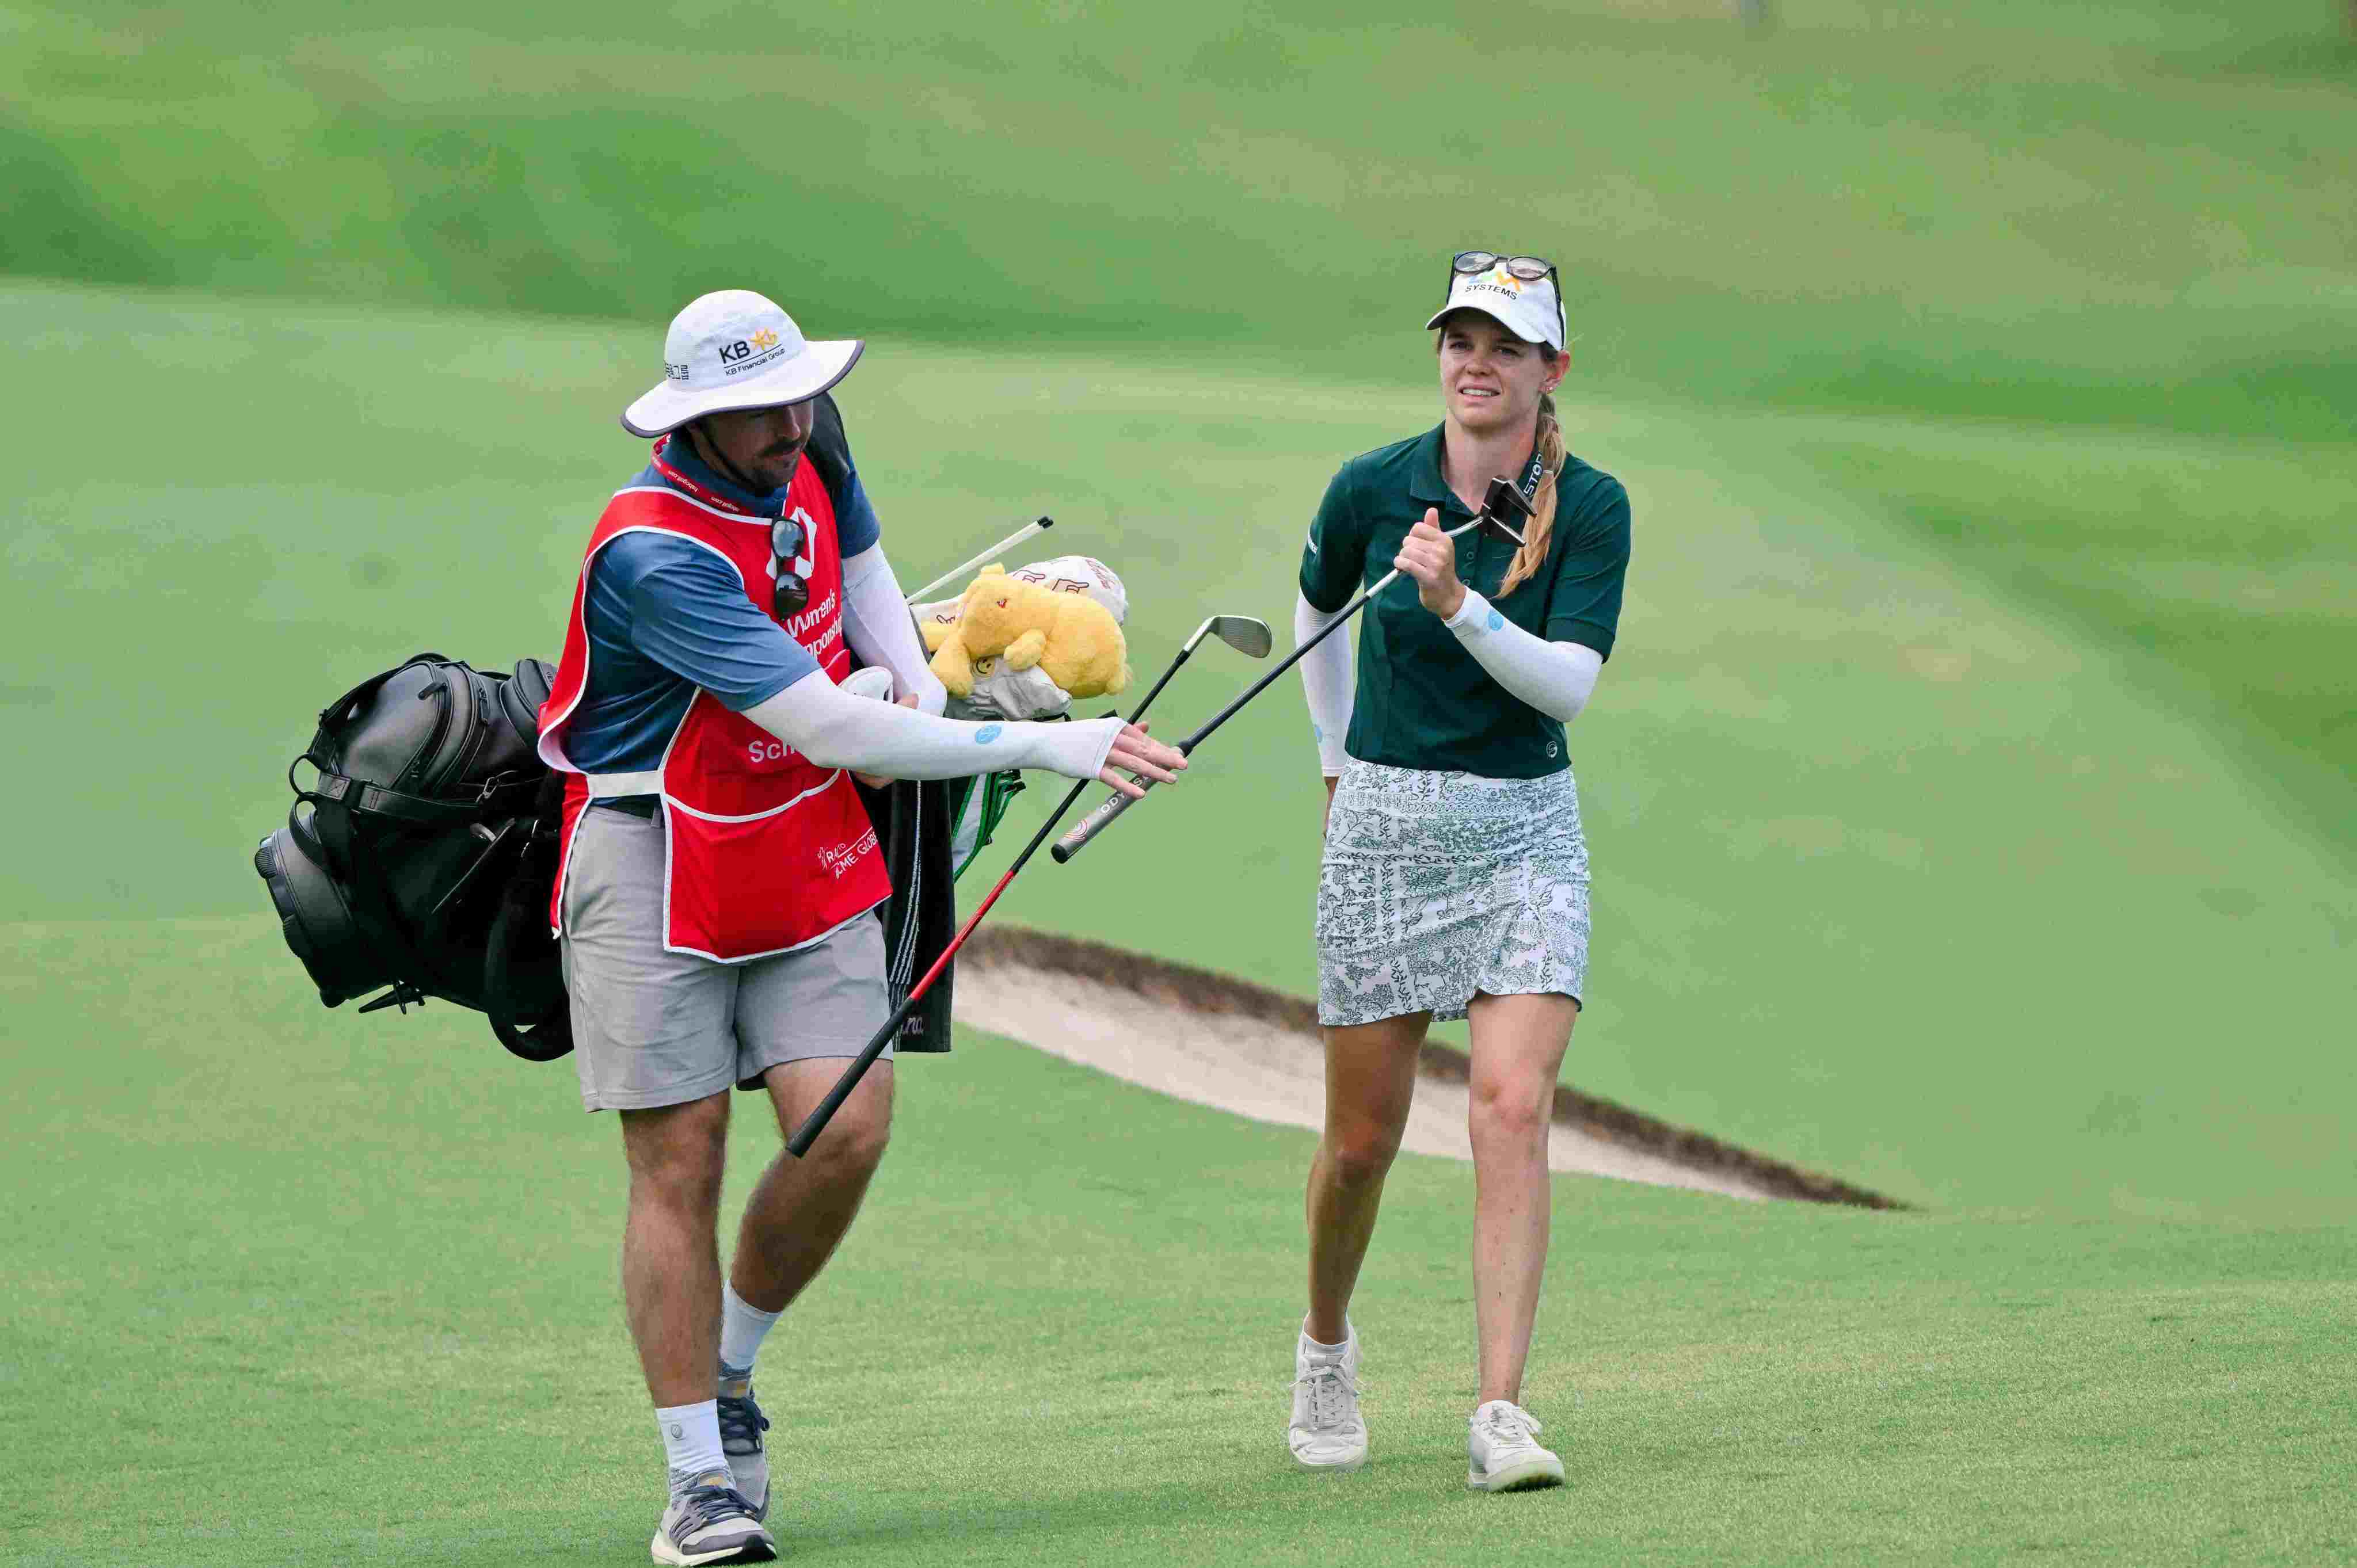 American Sarah Schmelzel grabbed the early lead at the HSBC Women’s World Championship in Singapore. Photo: Handout